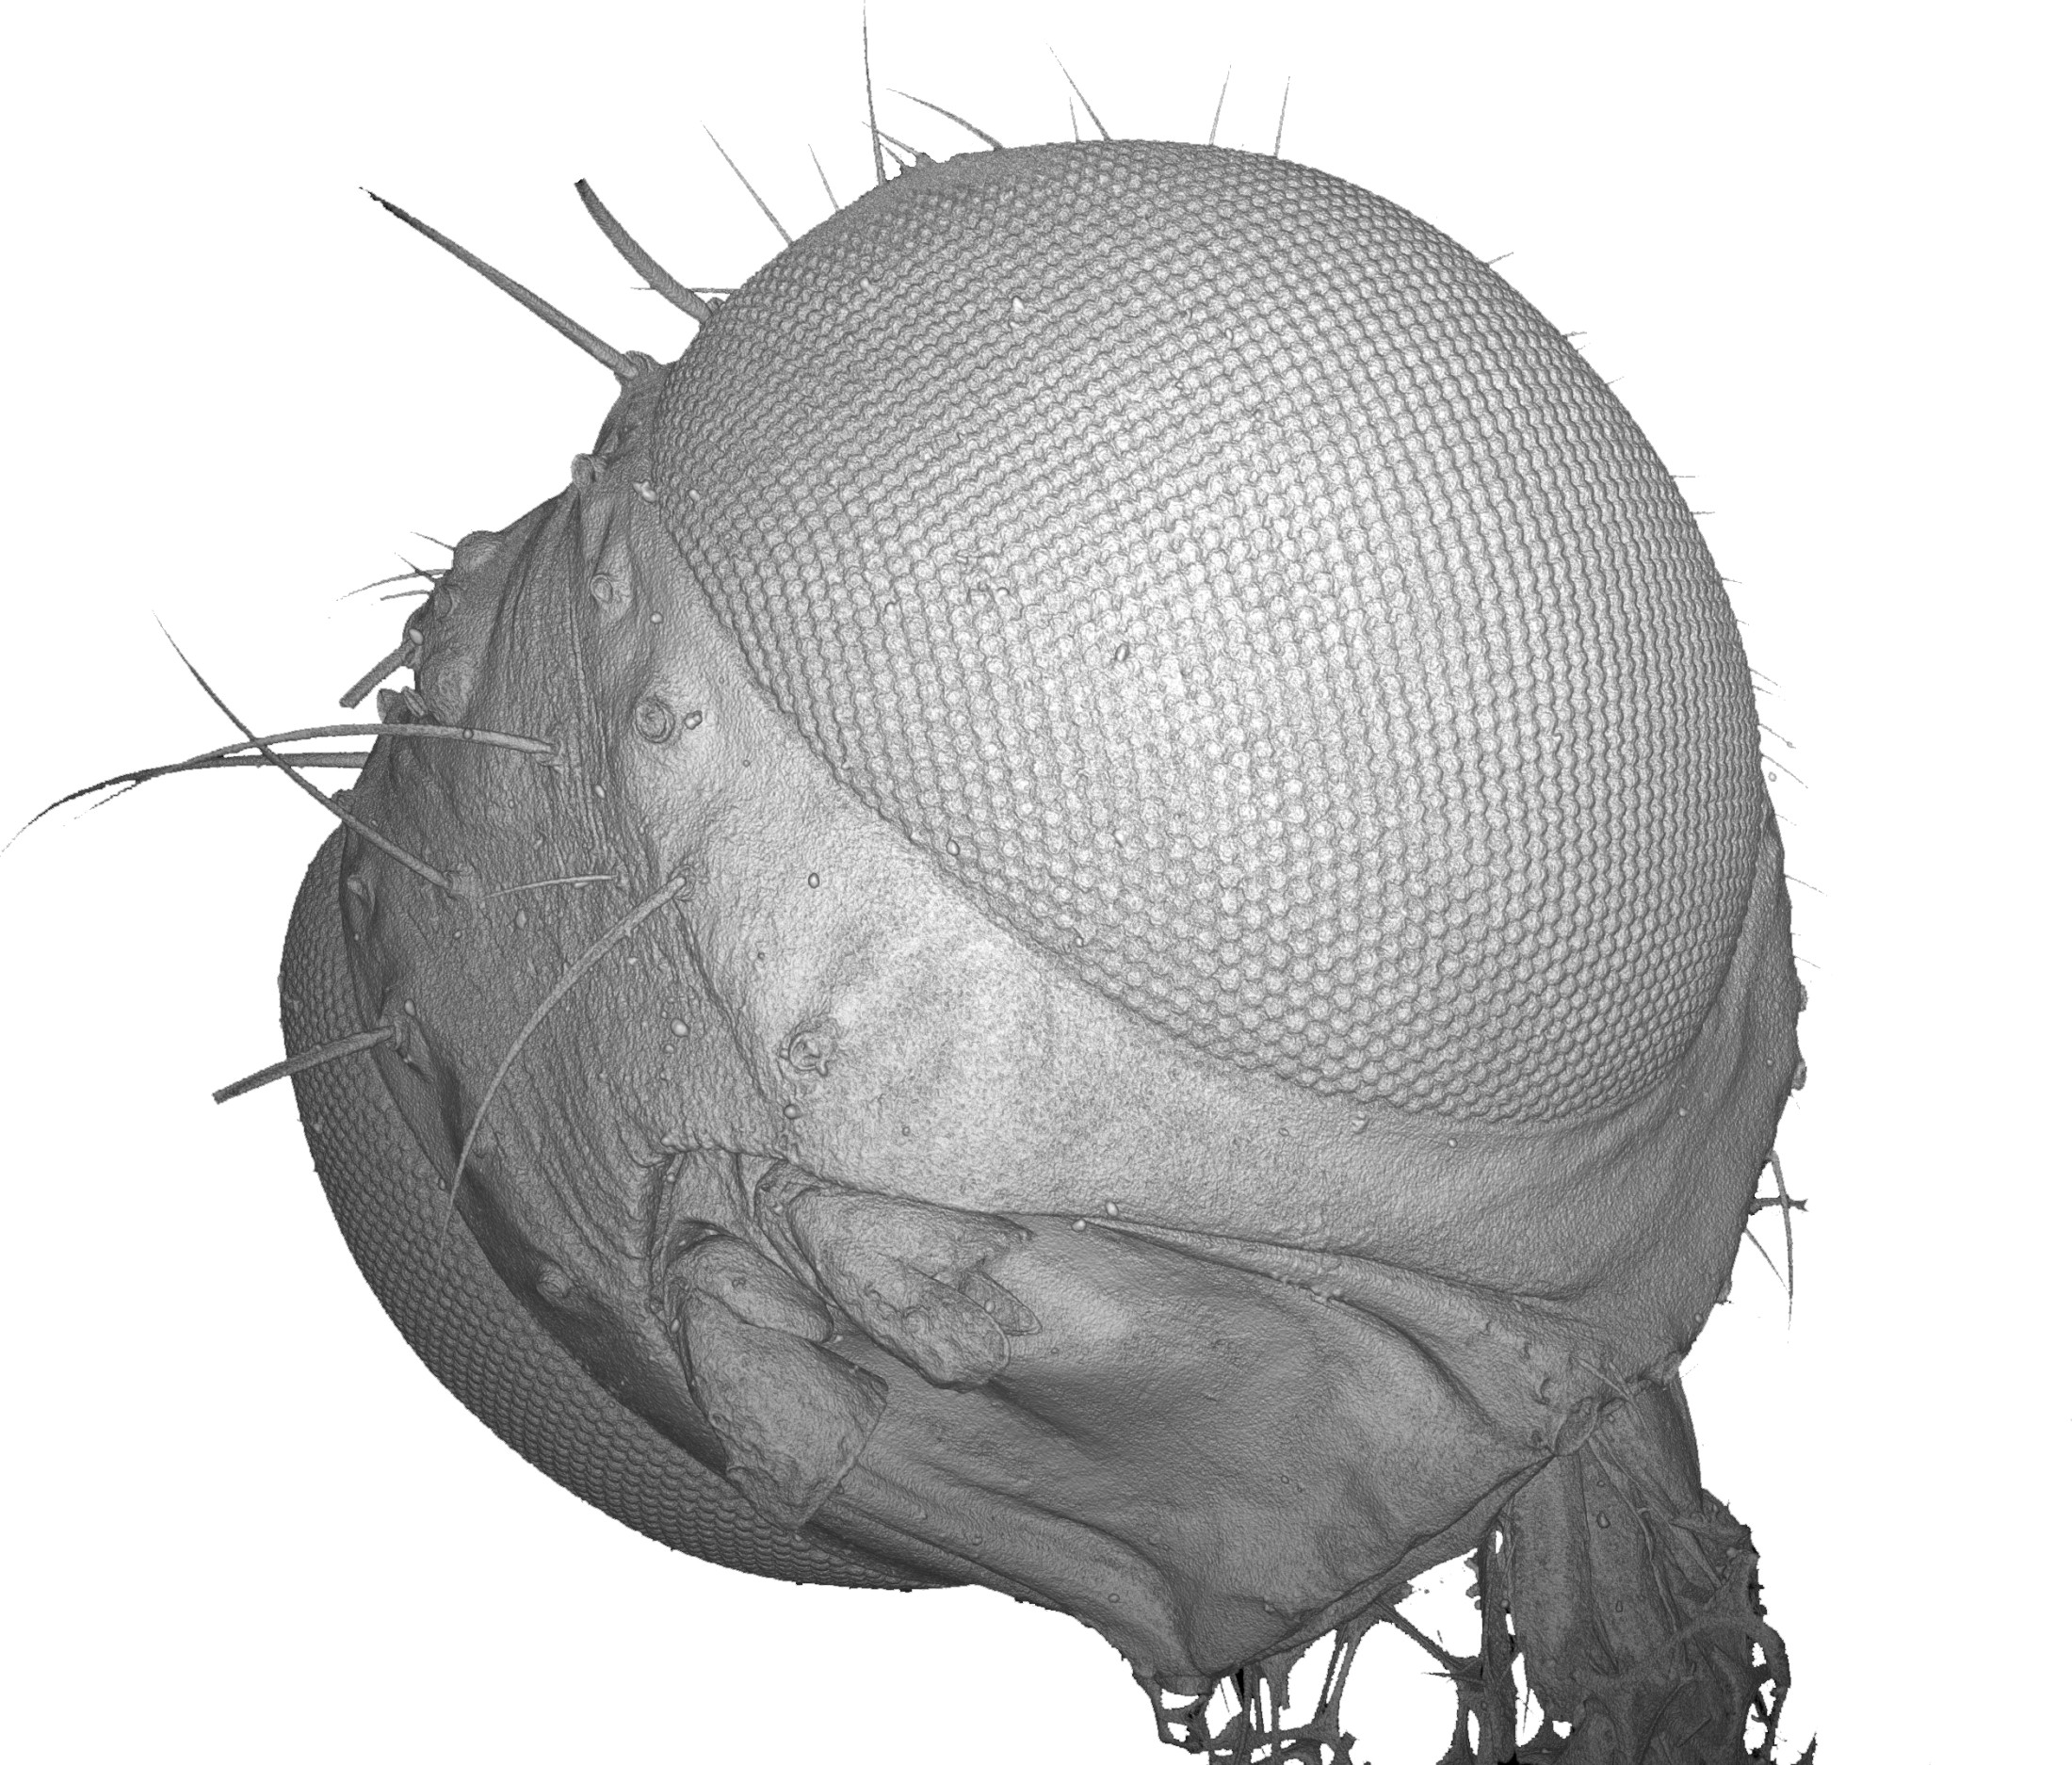 3D CT-reconstruction of an insect's head (Nyrmea kervillea) for investigation of the finest structures of microscopic biological samples. Normal scan (0.8 µm / 45 min): 3D CT-reconstruction of an insect's head (Nyrmea kervillea) for investigation of the finest structures of microscopic biological samples. Normal scan (0.8 µm / 45 min)